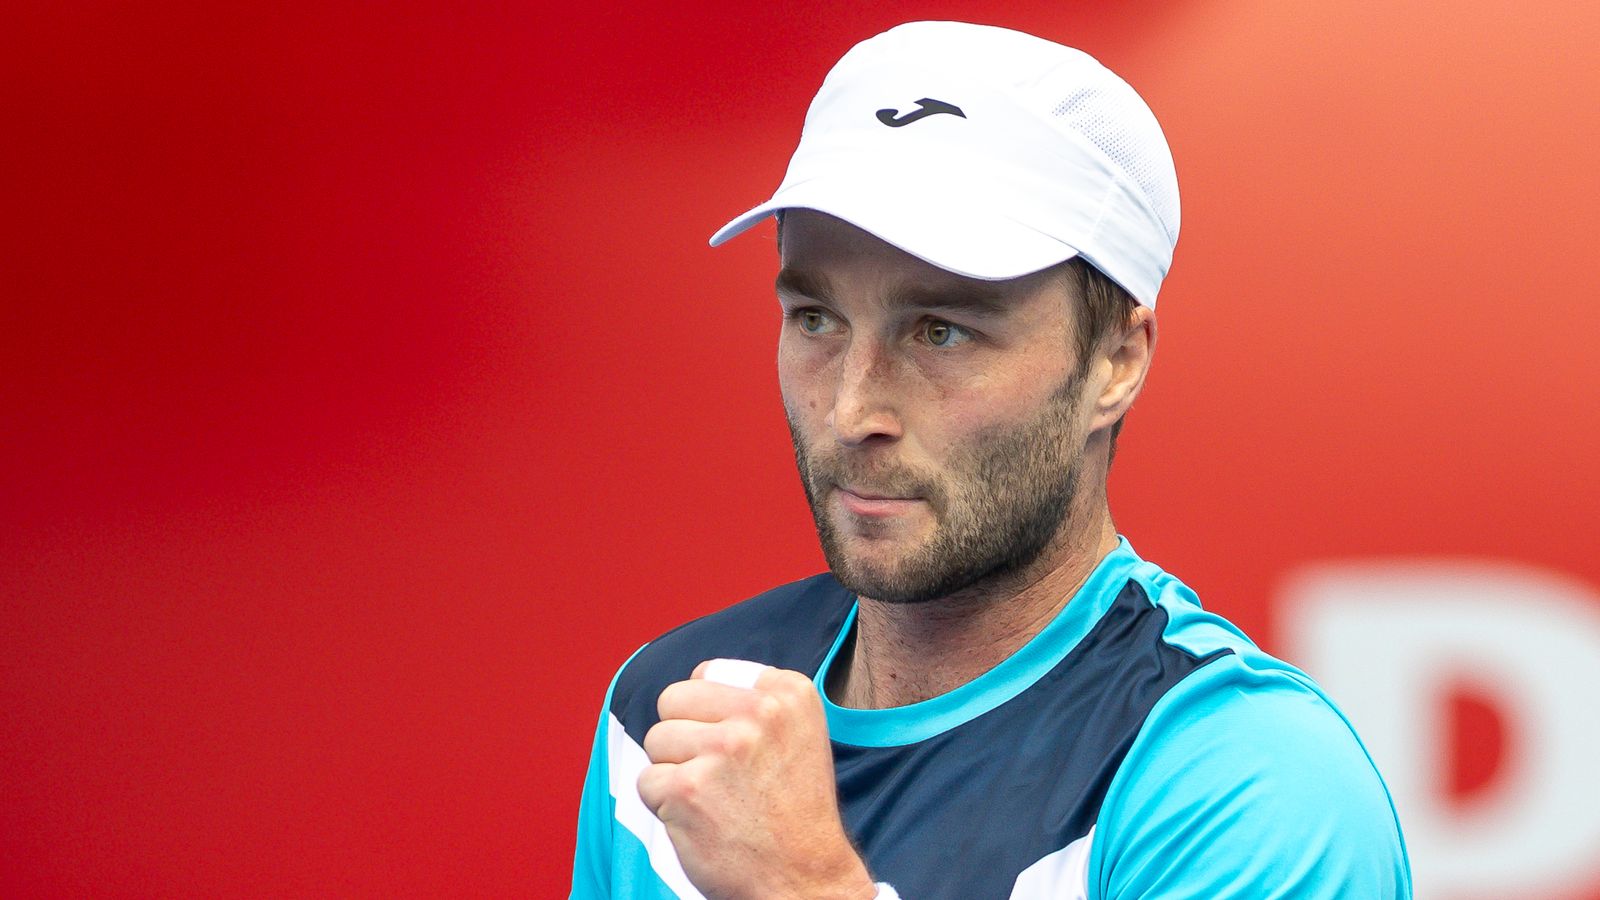 Indian Wells: Liam Broady one win away from reaching main draw of ATP 1000 event in California